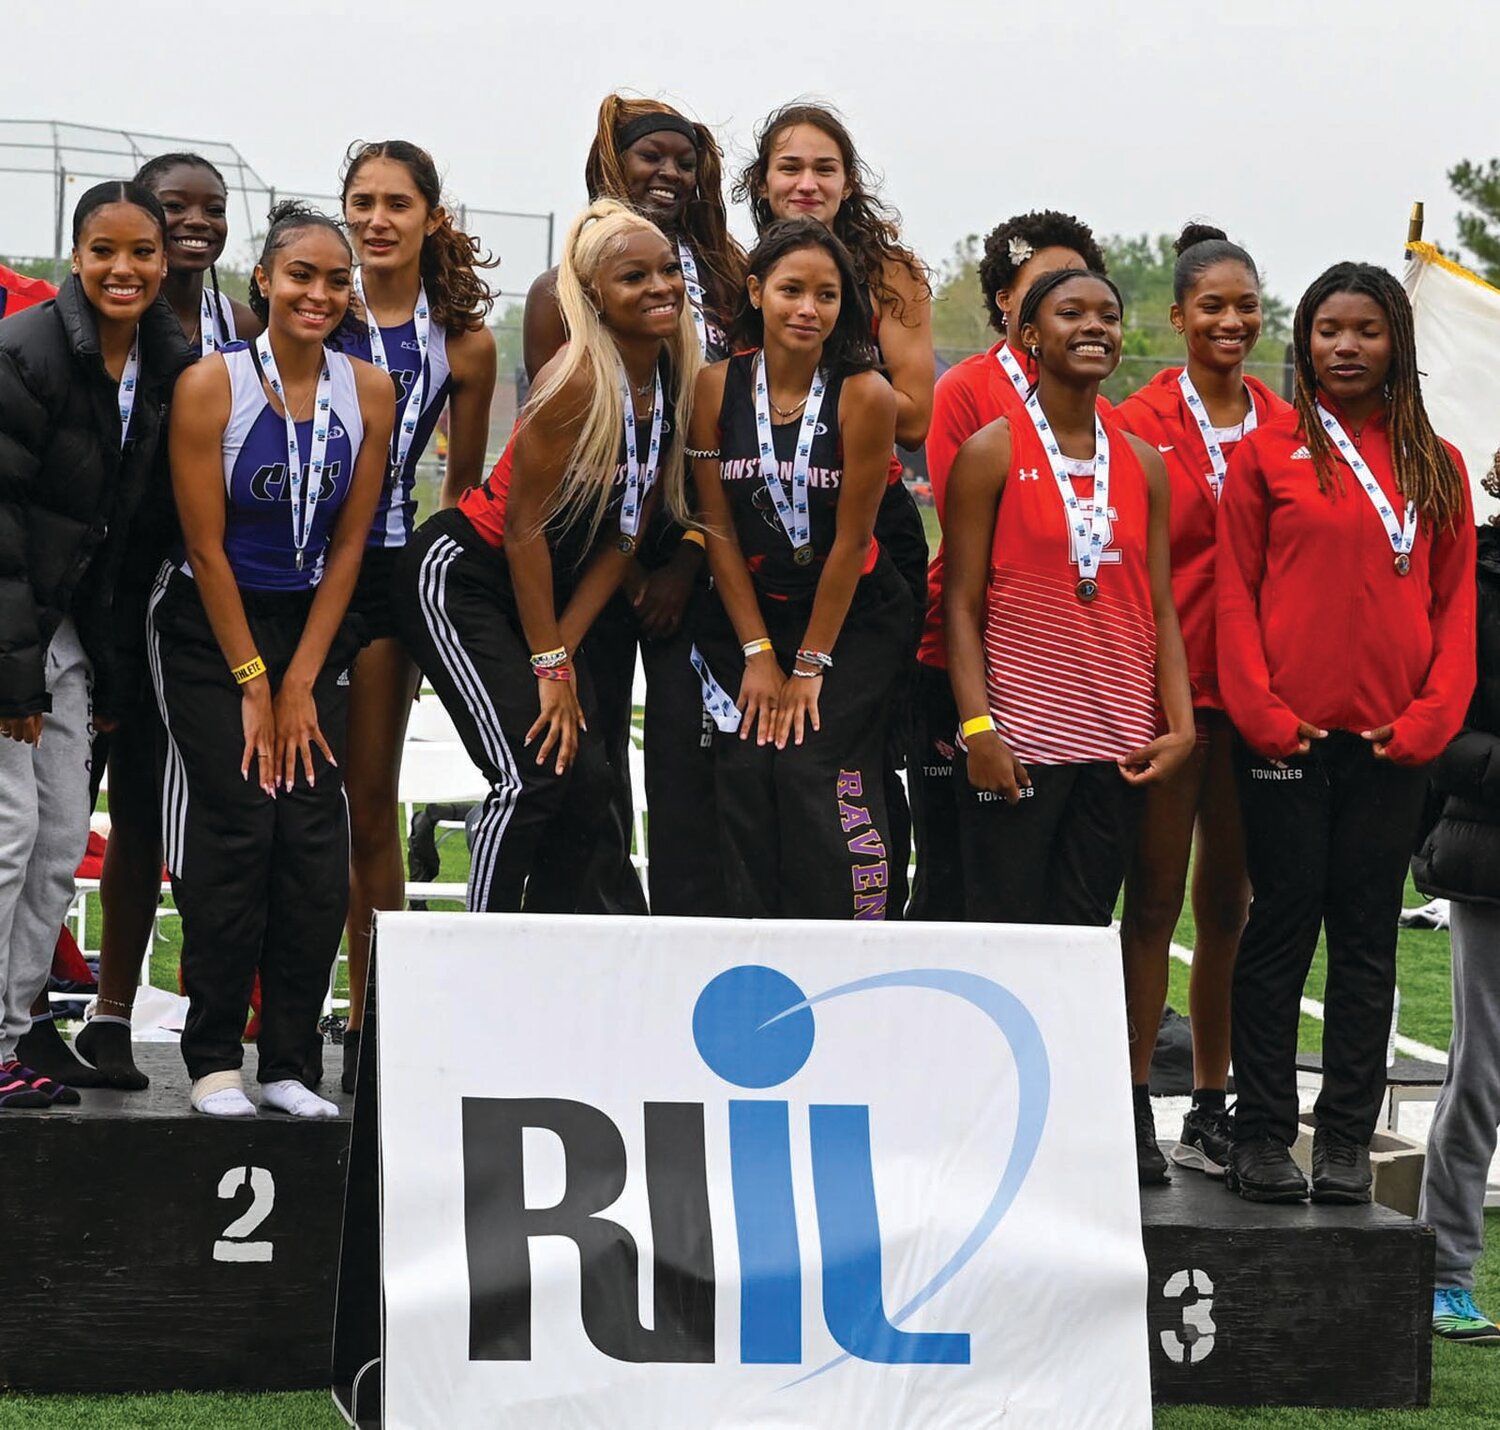 STATE CHAMPS: The Cranston West relay team of Ailani Sutherland, Quiana Pezza, Amelya D’Errico and Praise Mayson on top of the podium after winning the state title in the 400. (Photos by Leo van Dijk/rhodyphoto.zenfolio.com)